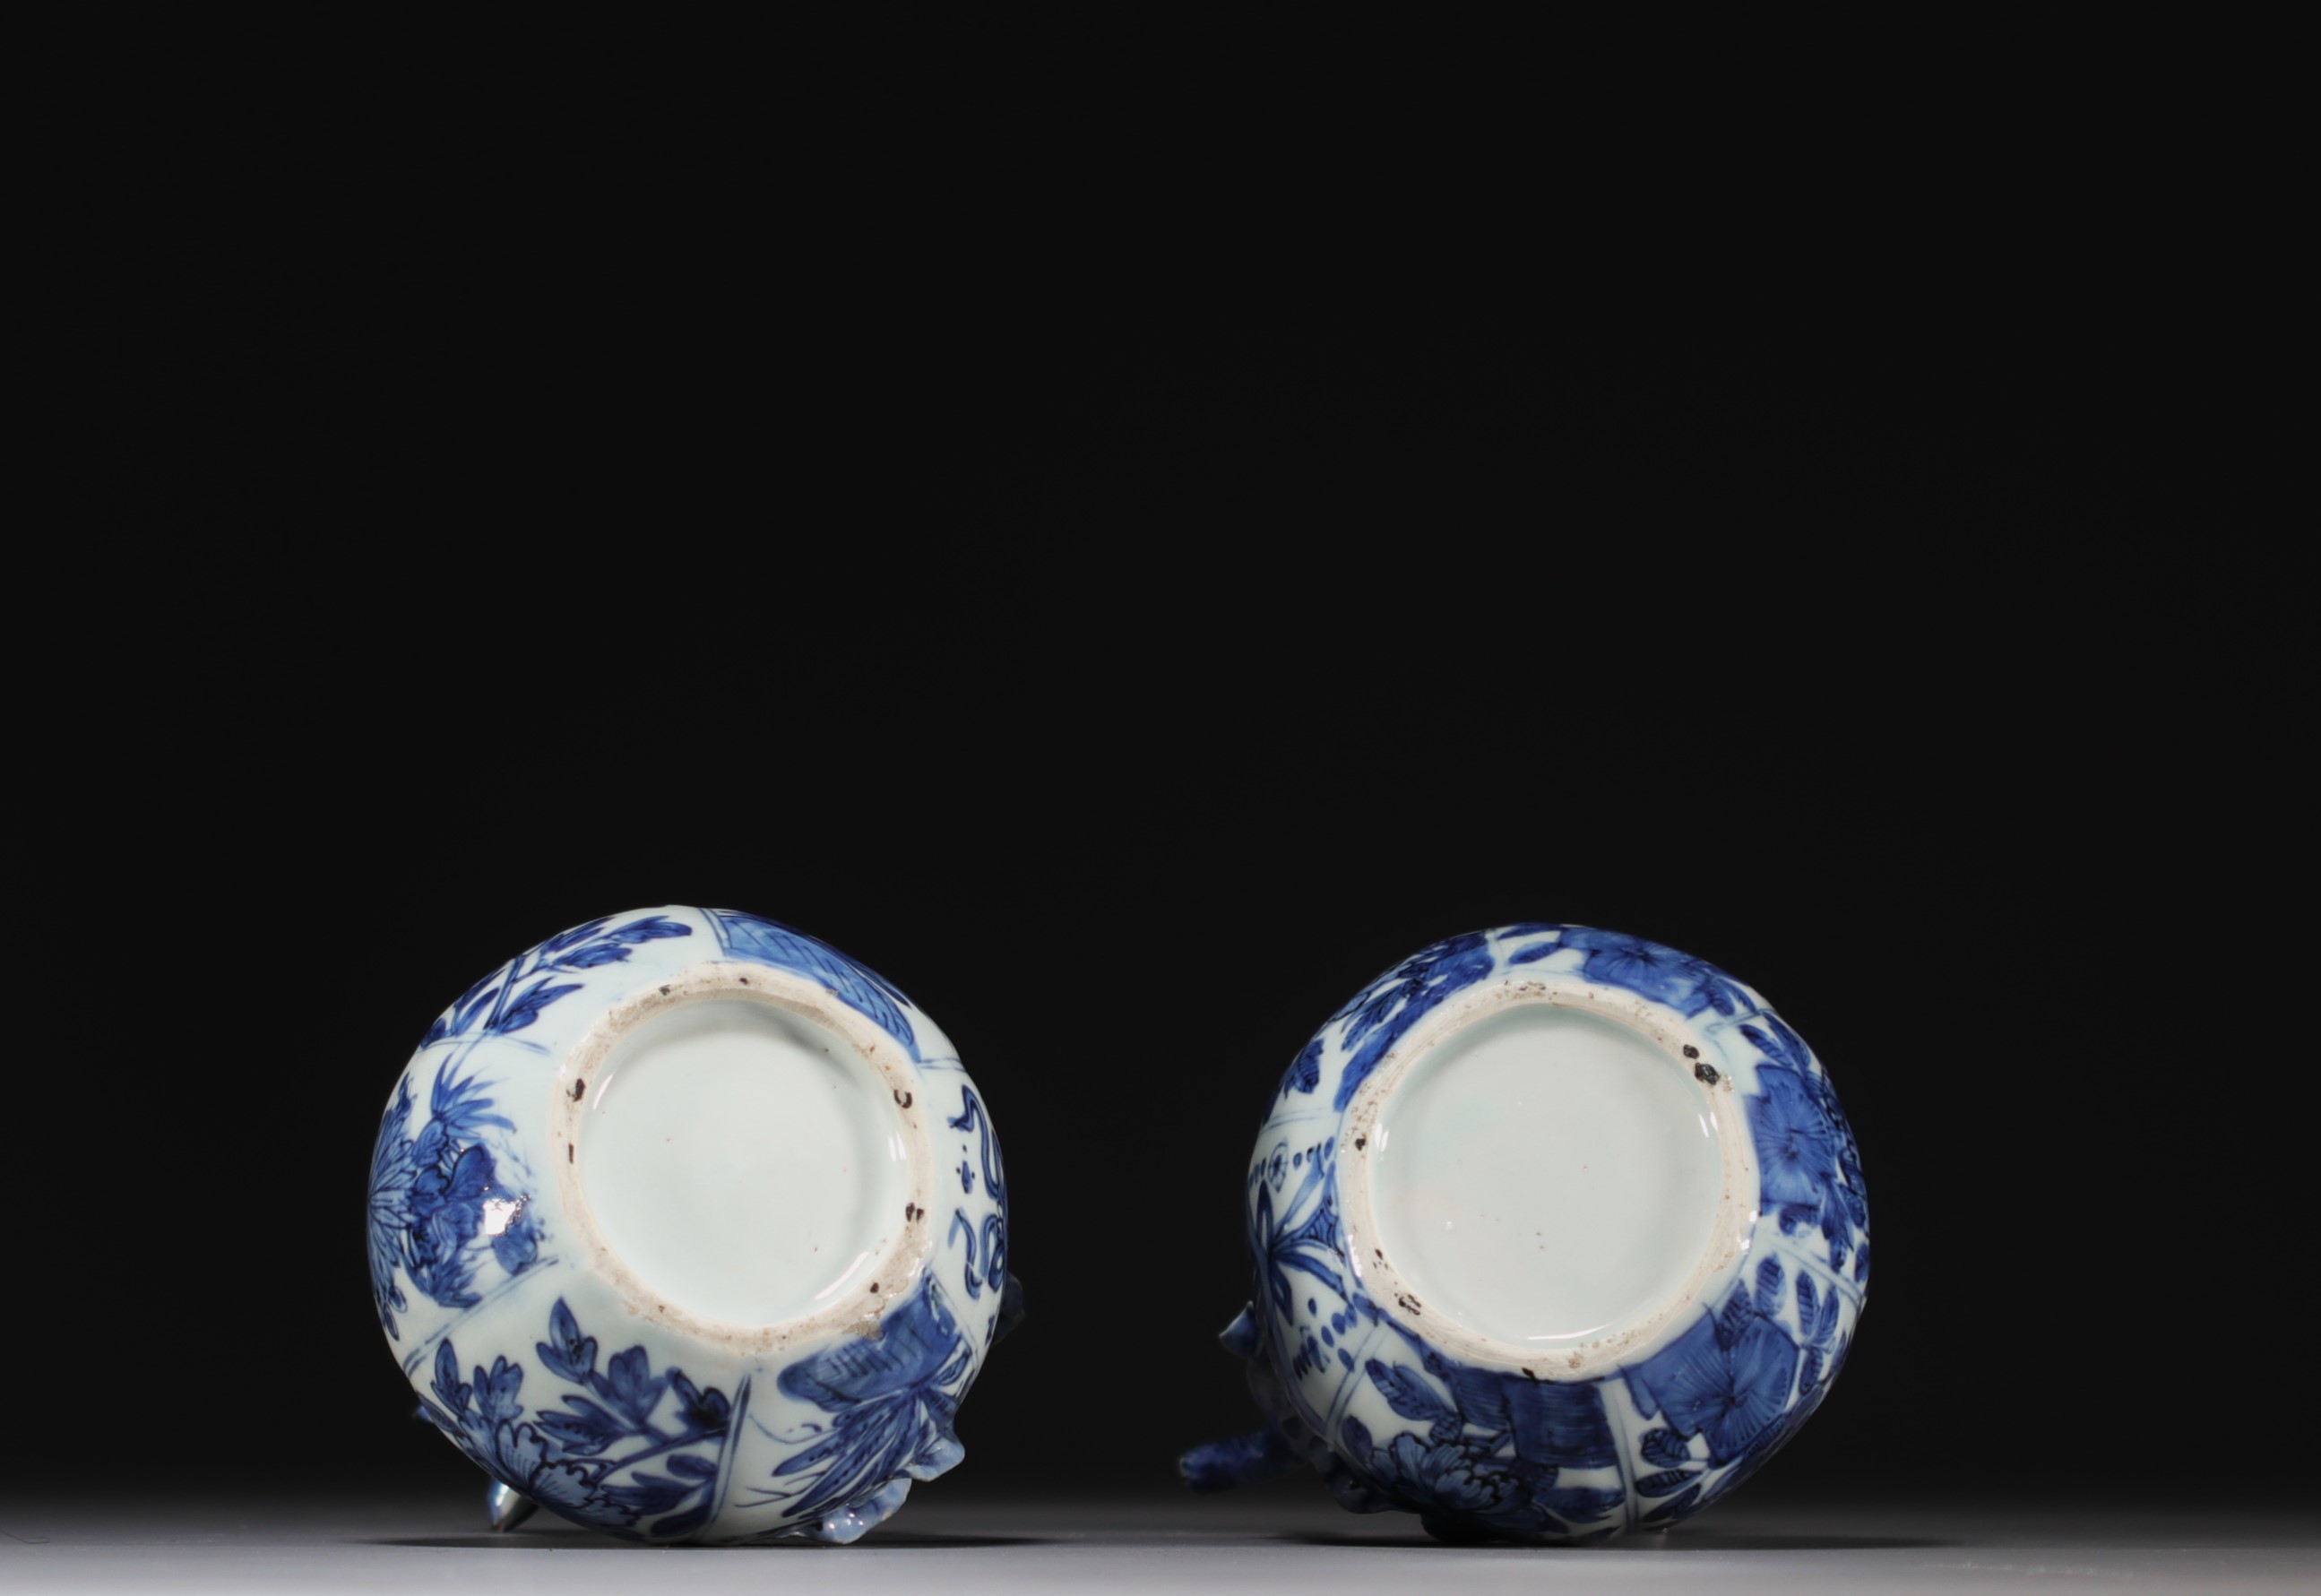 China - Pair of blue-white porcelain jugs with floral decoration, Wanli, Ming dynasty. - Image 6 of 7